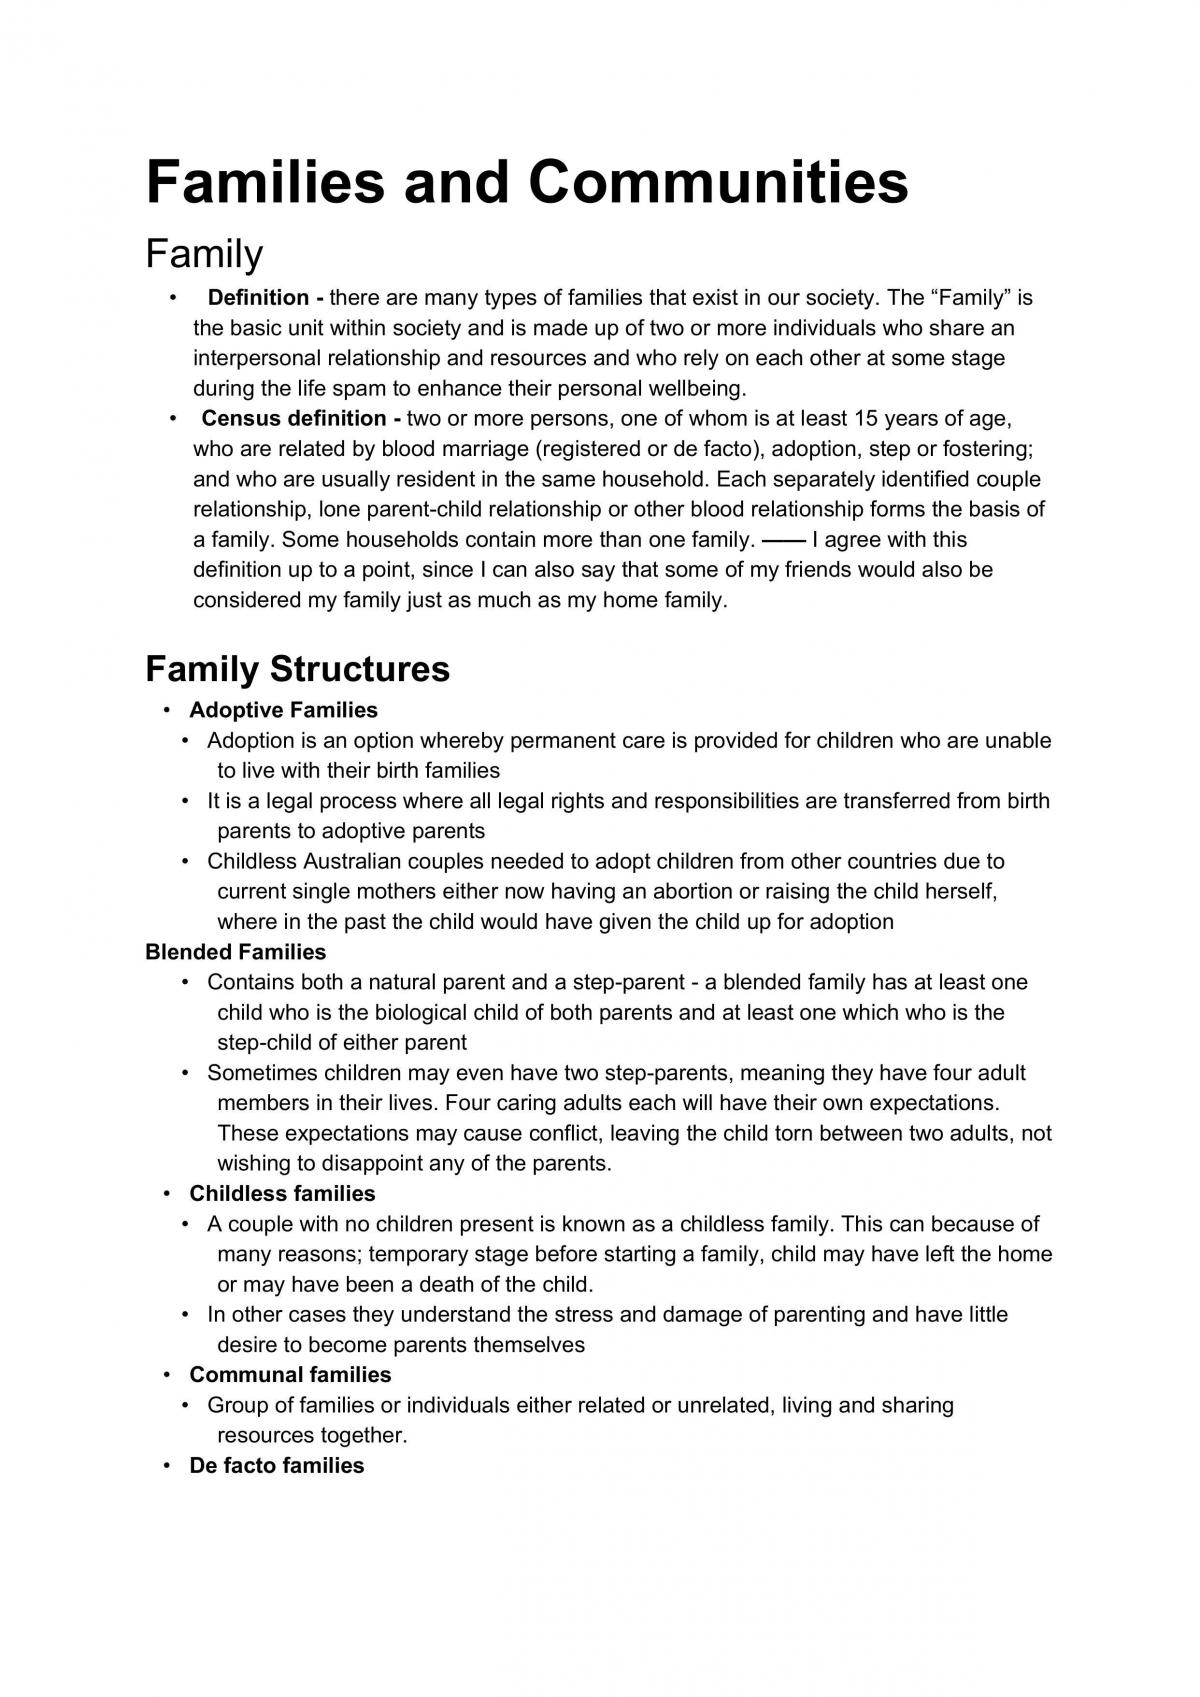 family structure assignment